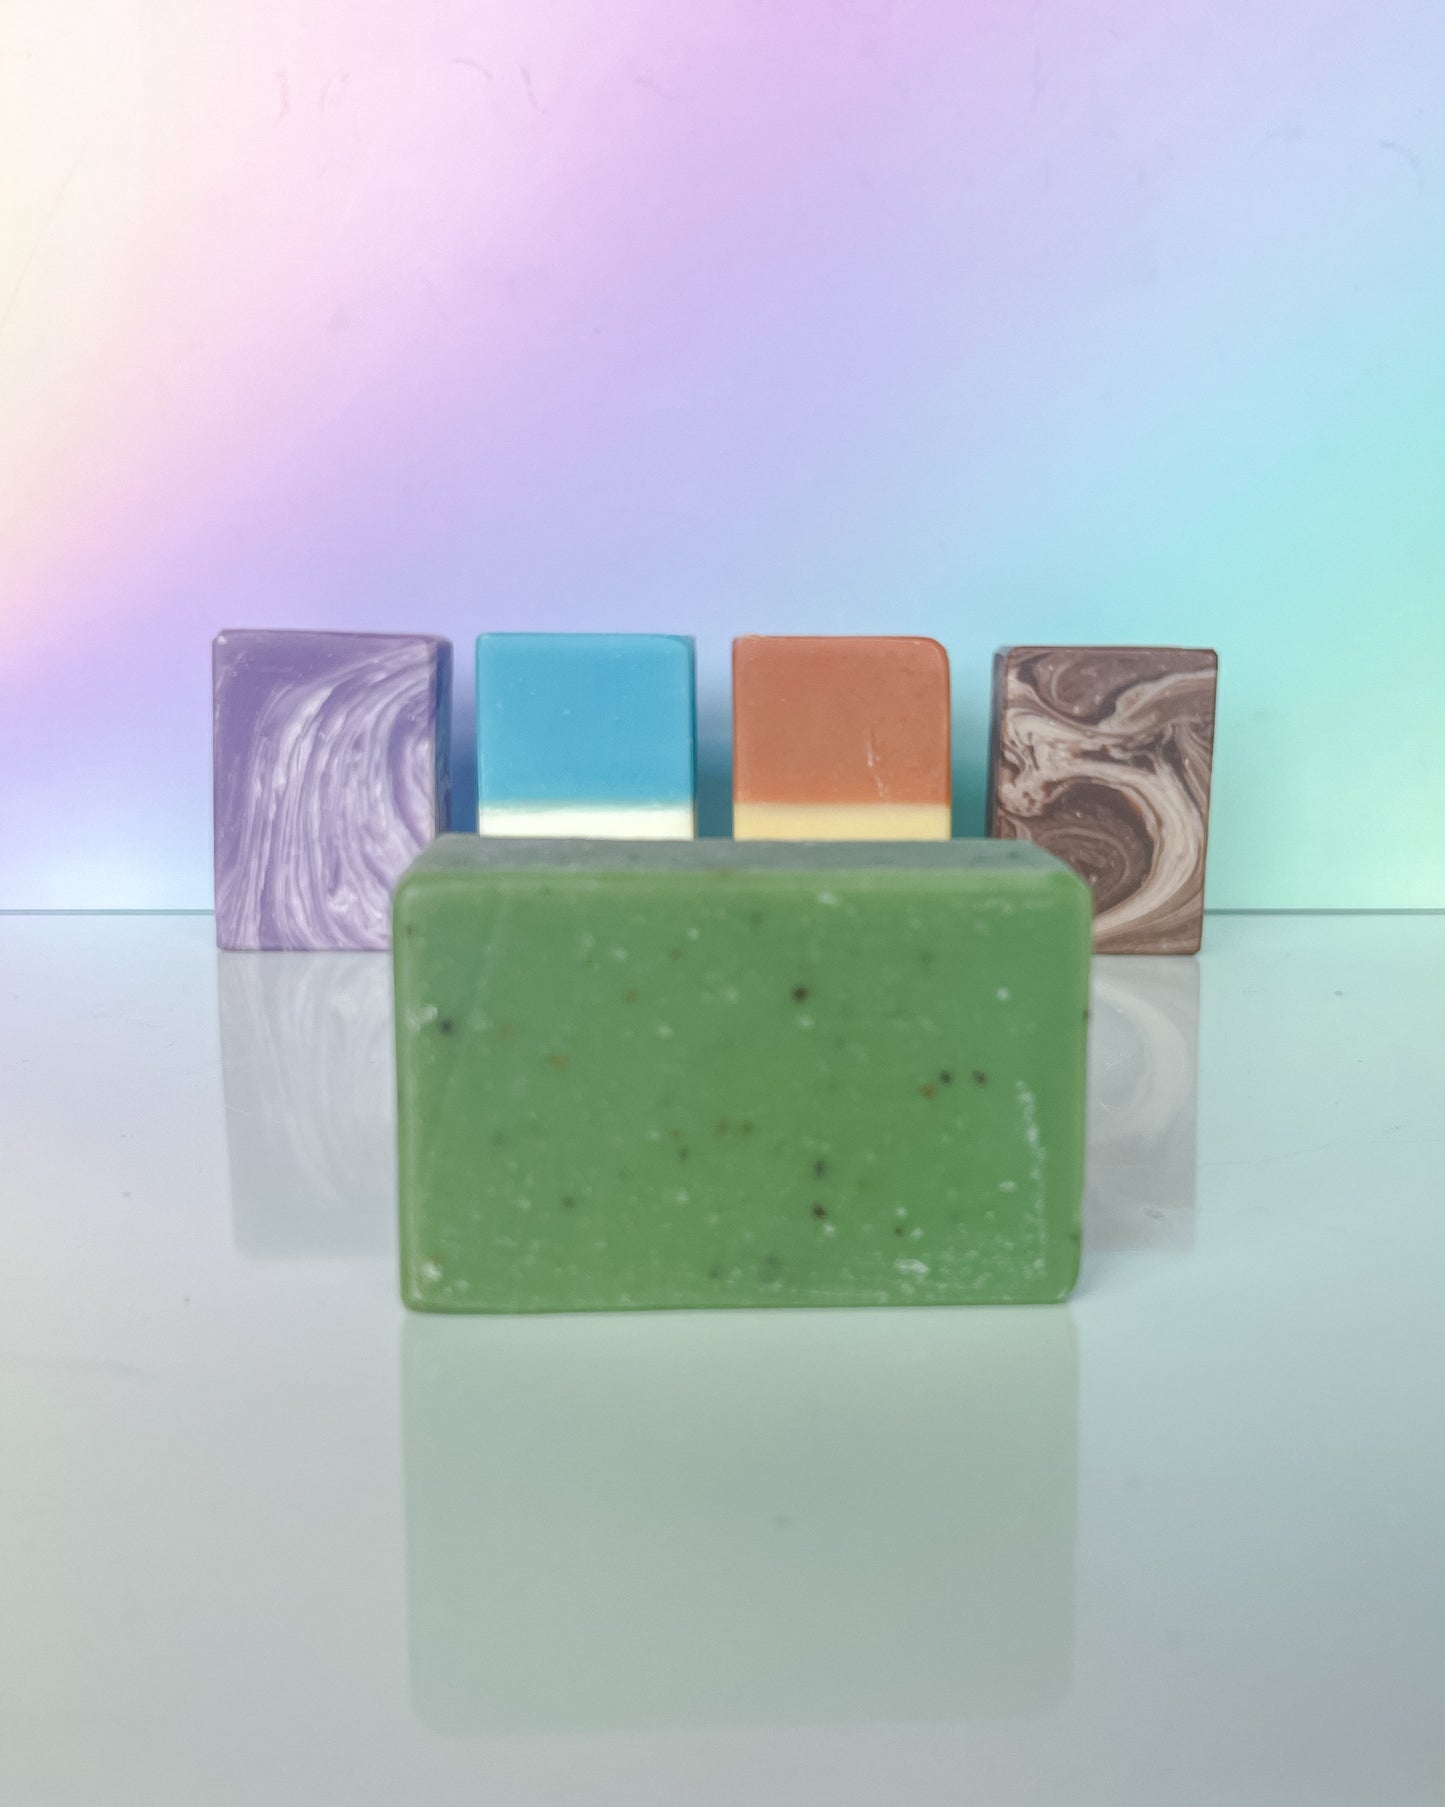 Evergreen Bar Soap - 5oz | aromatic & fresh notes of woodsy scent